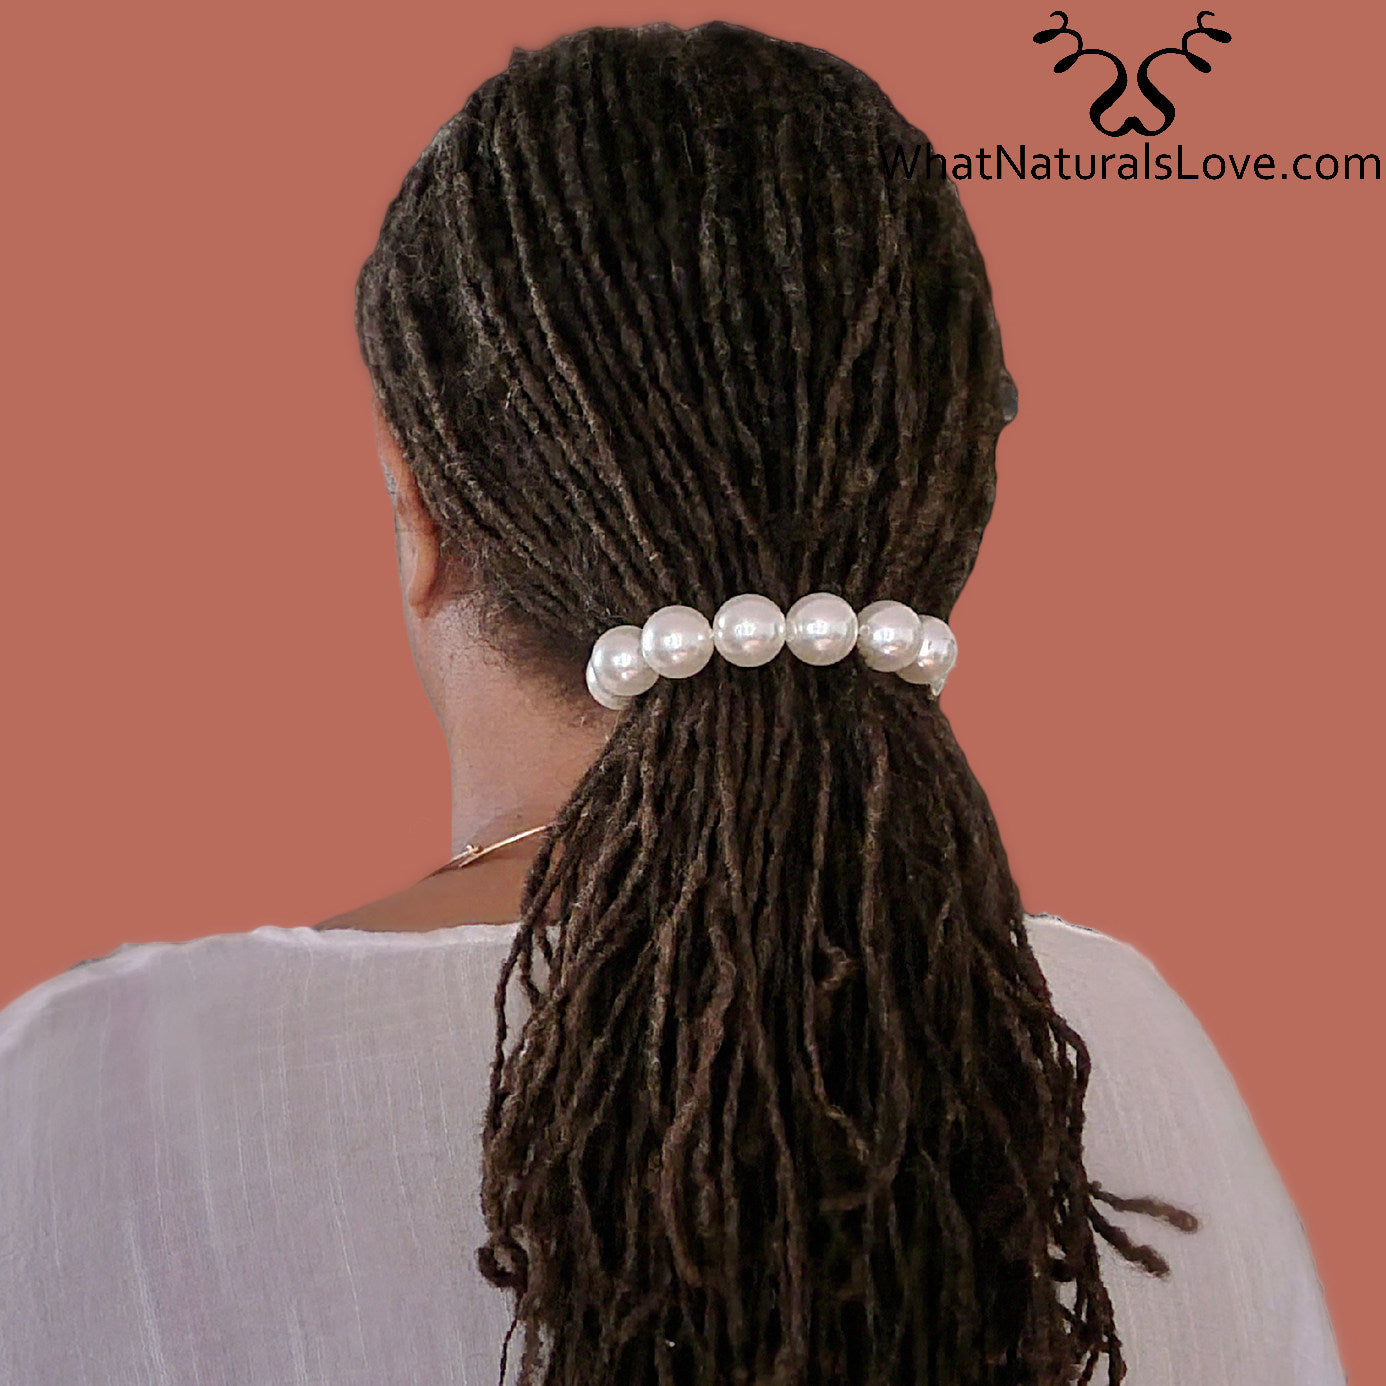 Pearled scrunchi for Braids, Locs and Natural Hair